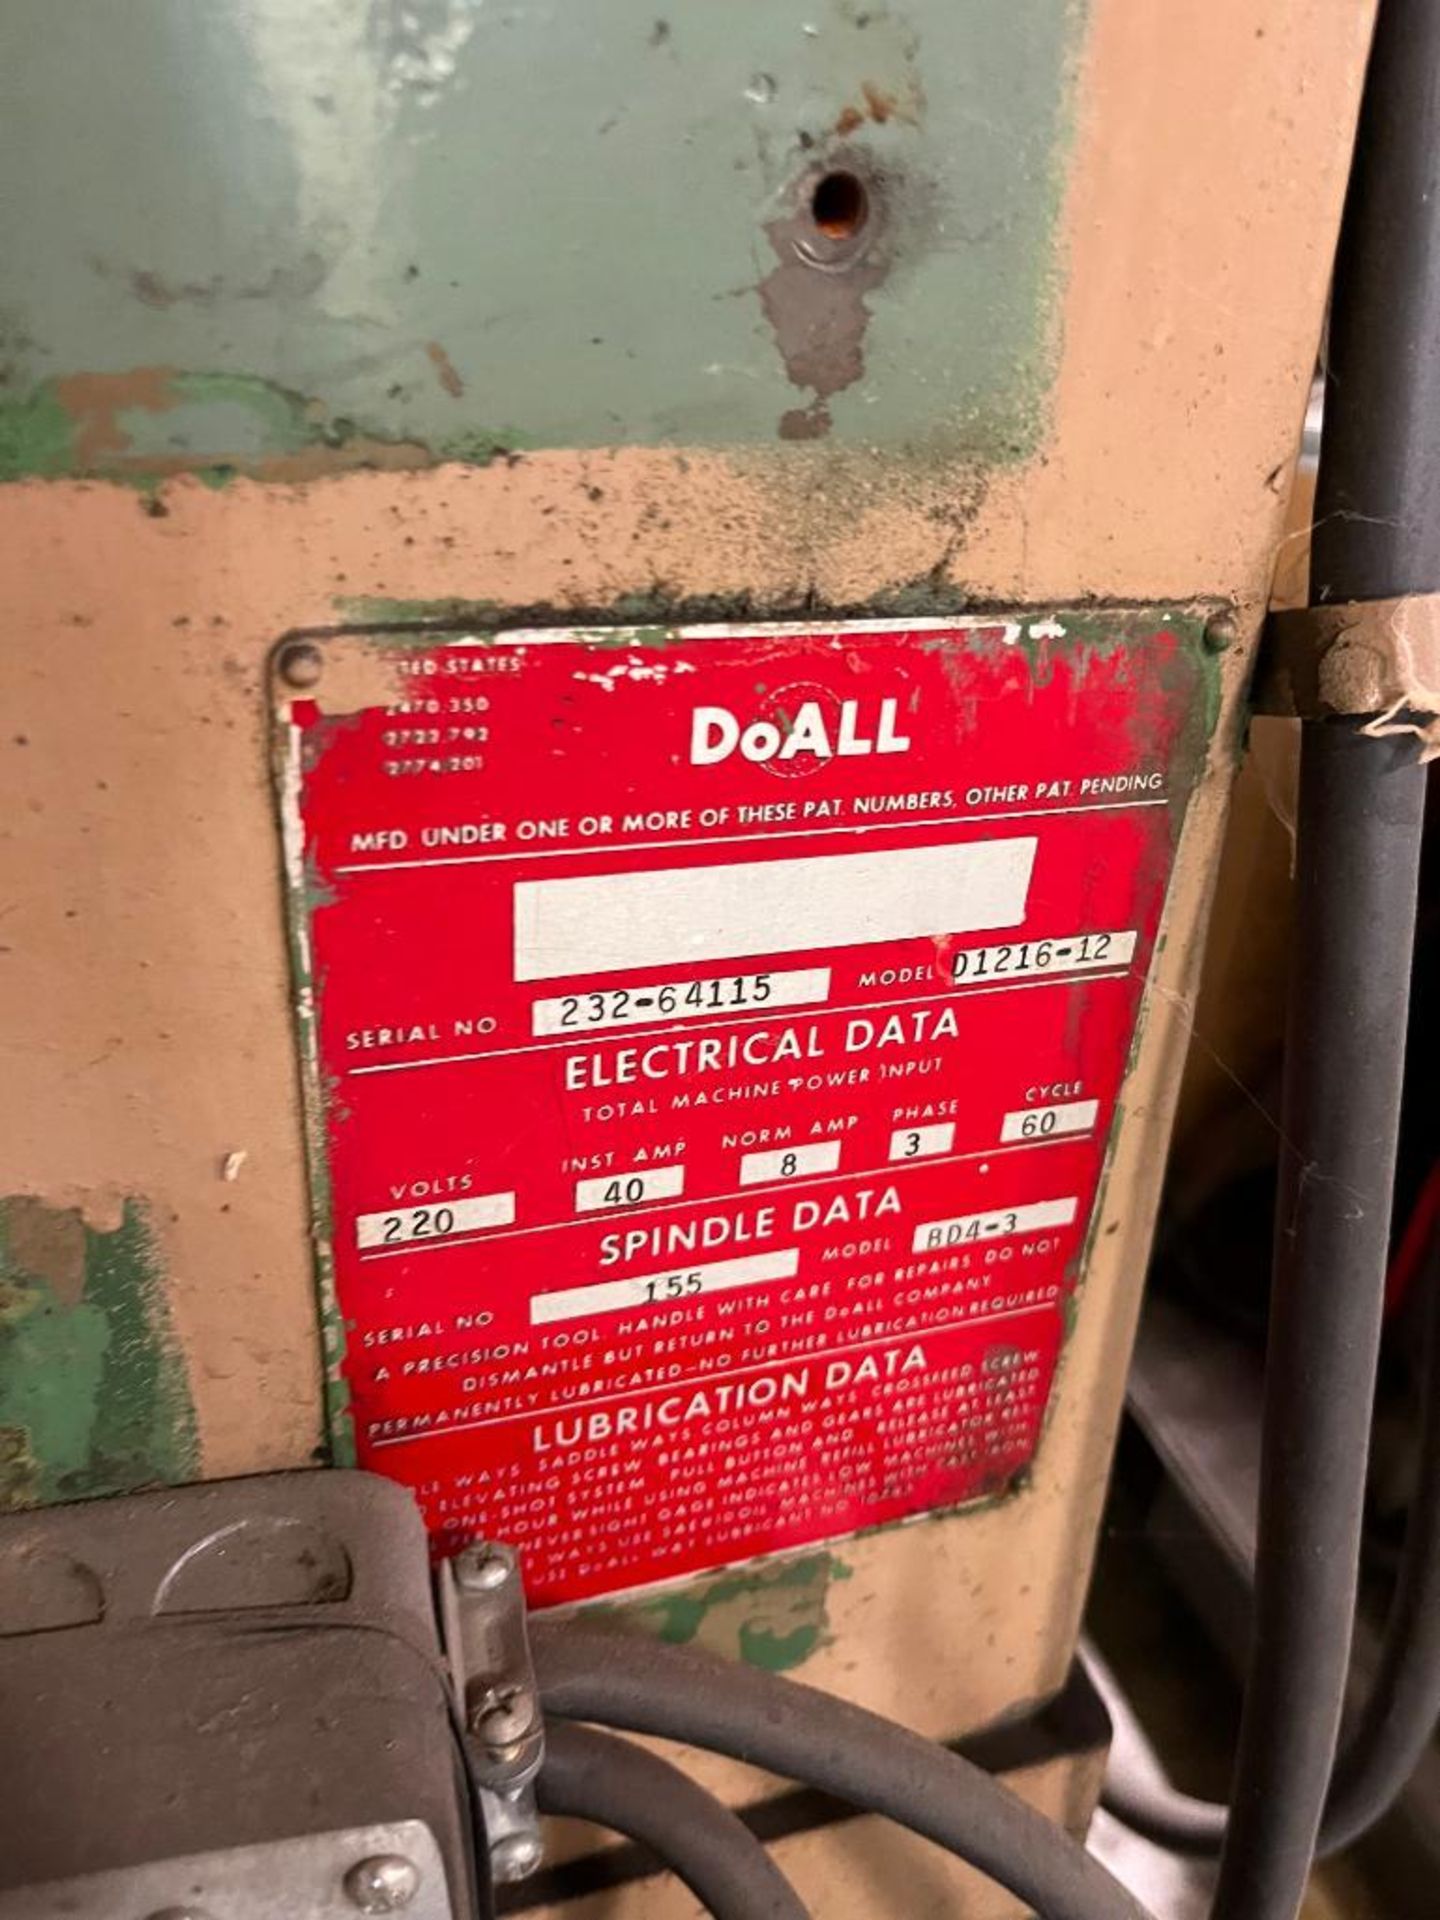 Doall Hand Feed Surface Grinder, Model D1216-12, S/N 232-64115 - Image 2 of 4